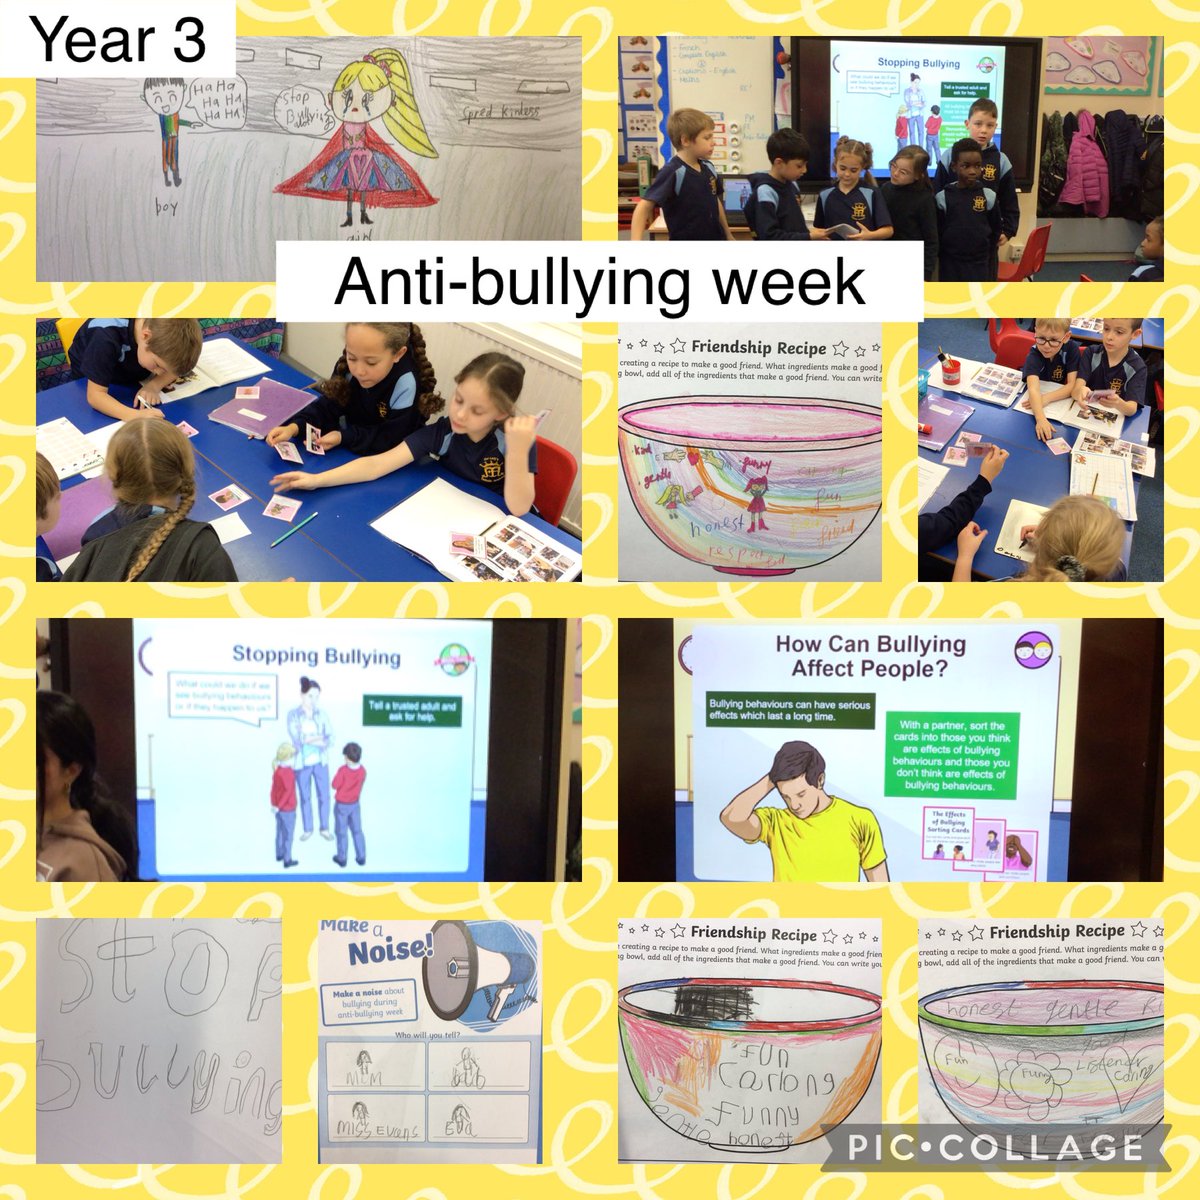 KS2 worked hard learning about #AntiBullyingWeek2023 

Year 3,4,5,6 pictures show the range of activities the pupils explored